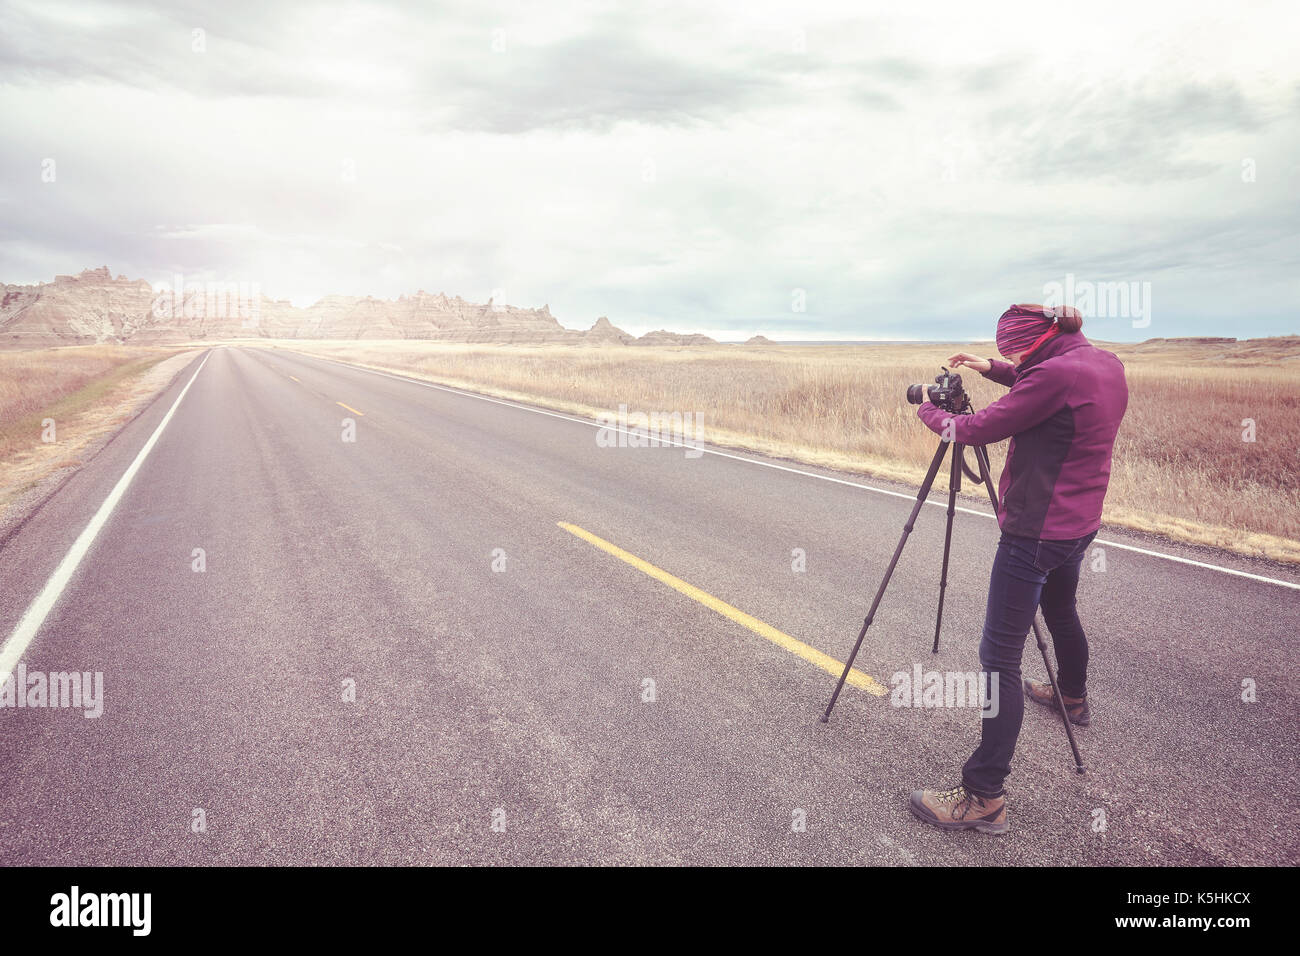 Landscape photographer takes pictures on an empty road at sunset, color toning applied, travel or work concept,  Badlands National Park, South Dakota, Stock Photo